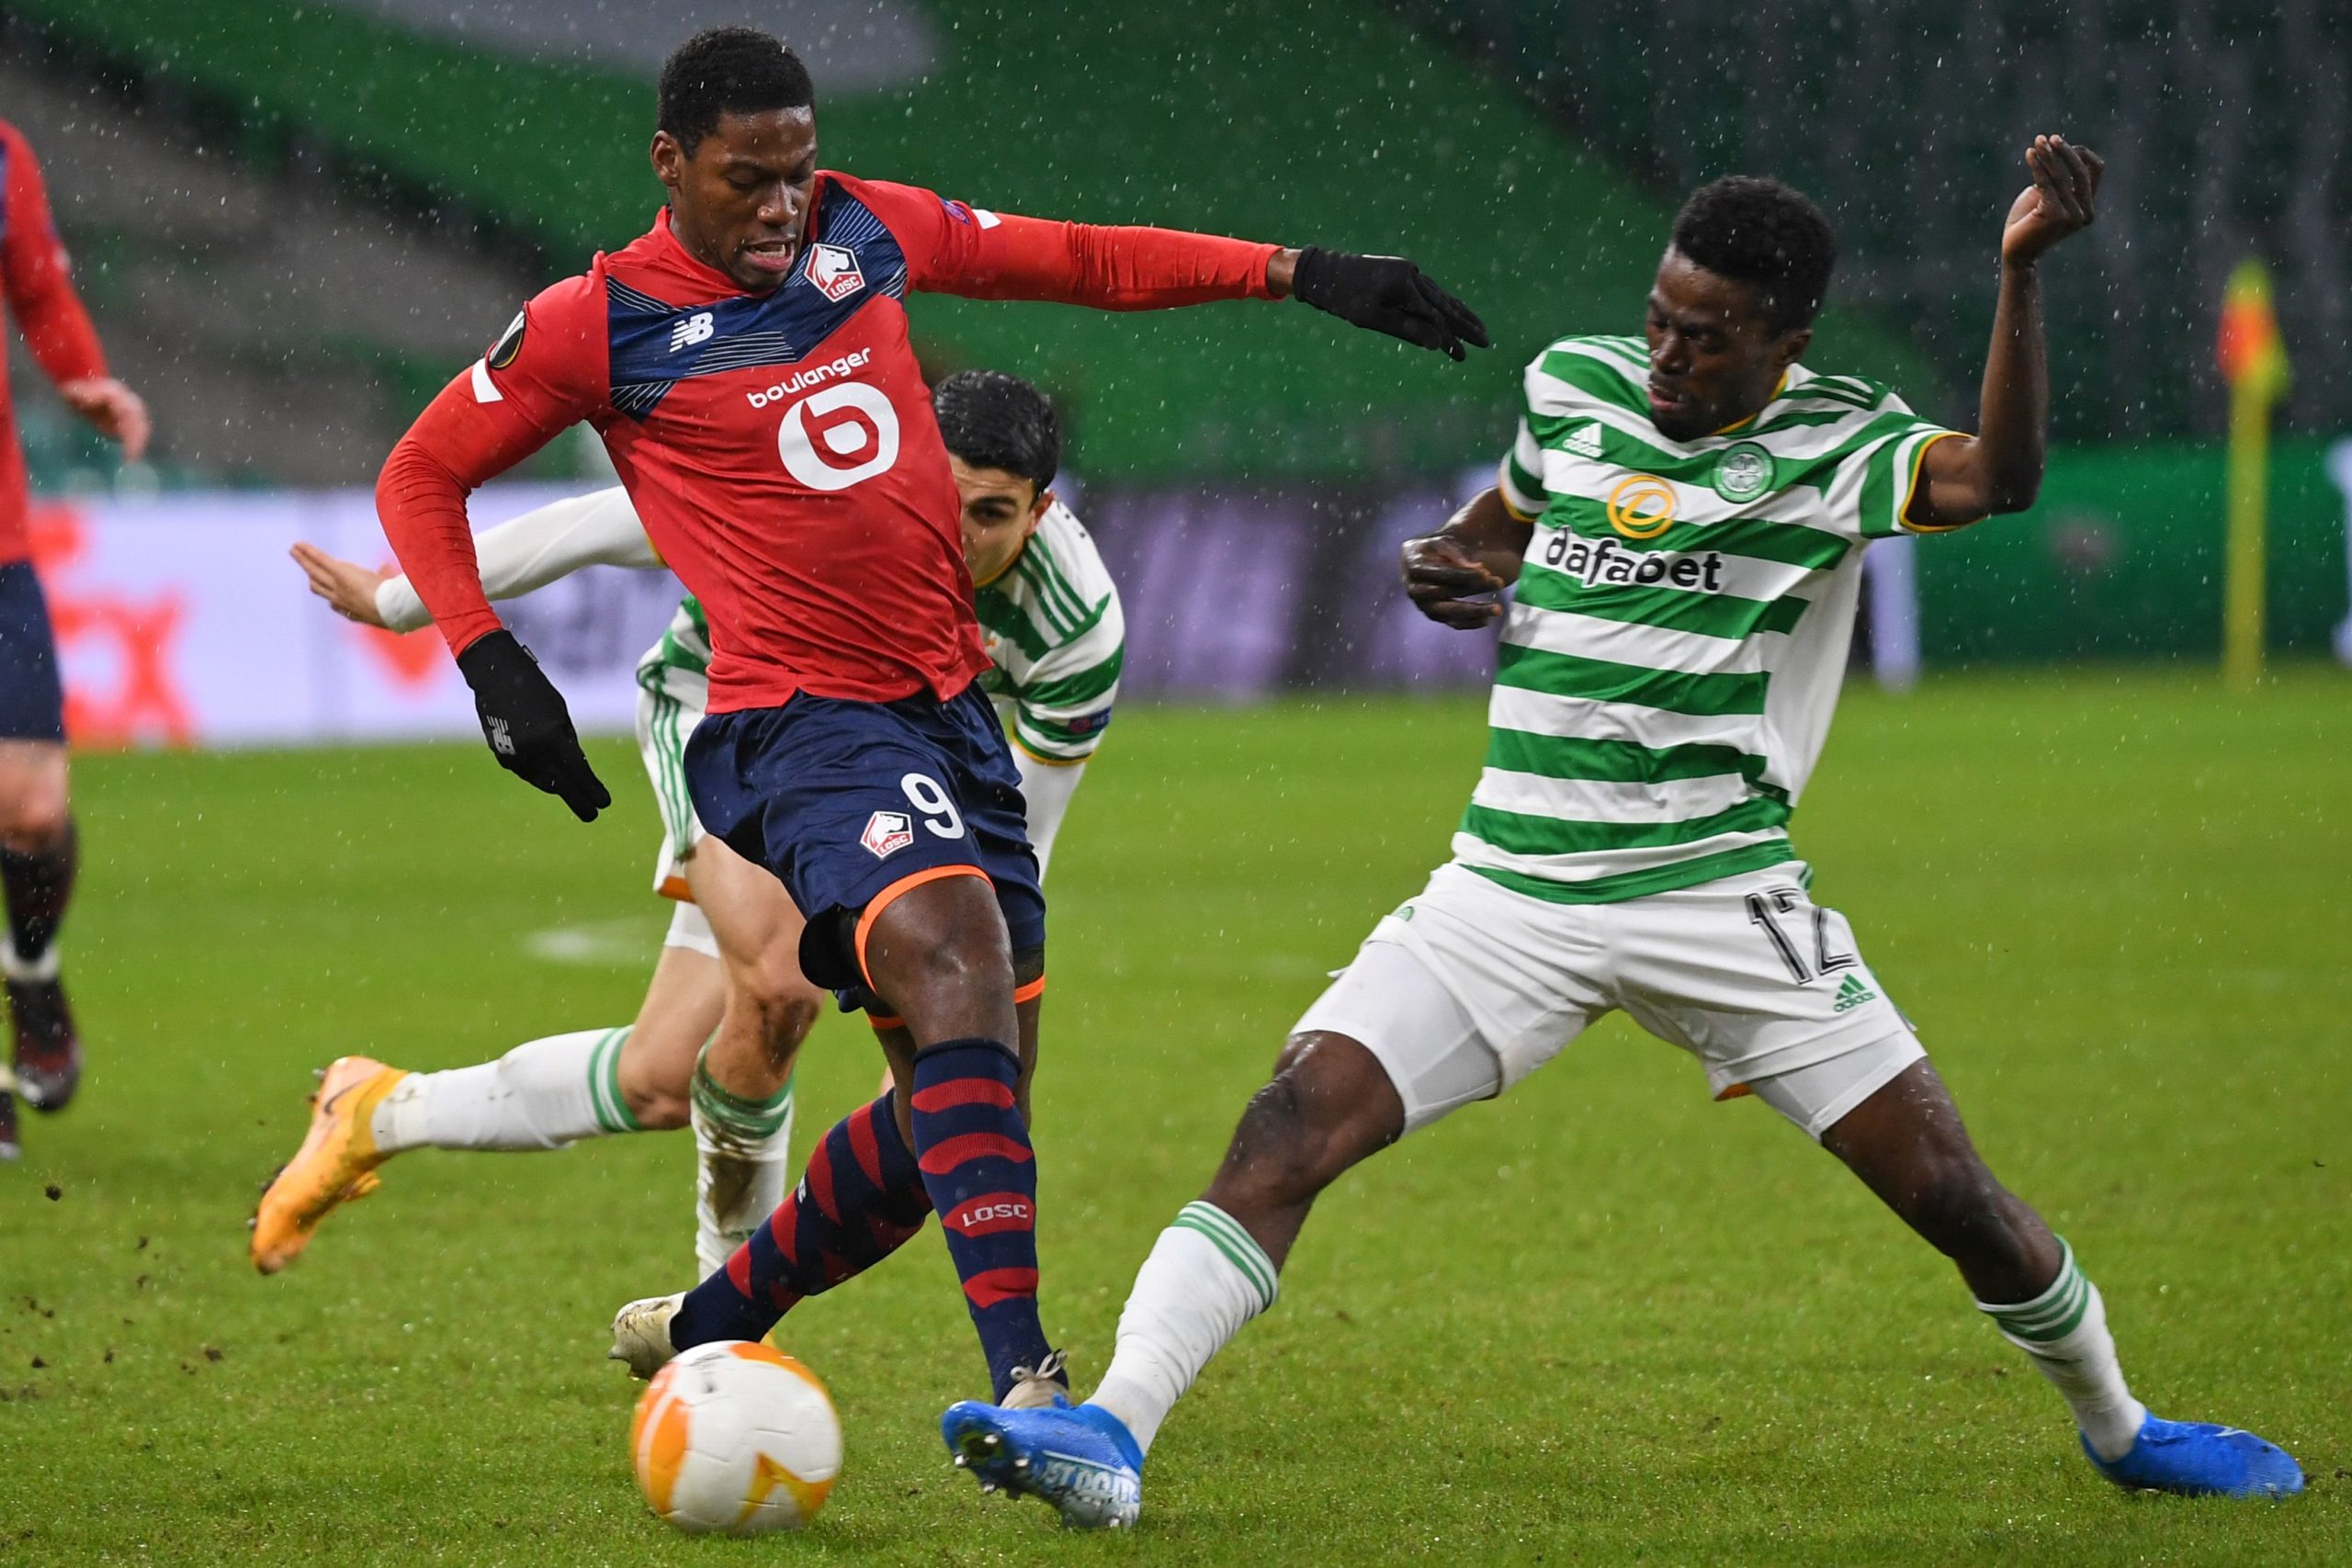 Ismaila Soro says he wants Celtic stay for a "long time" in brilliant interview